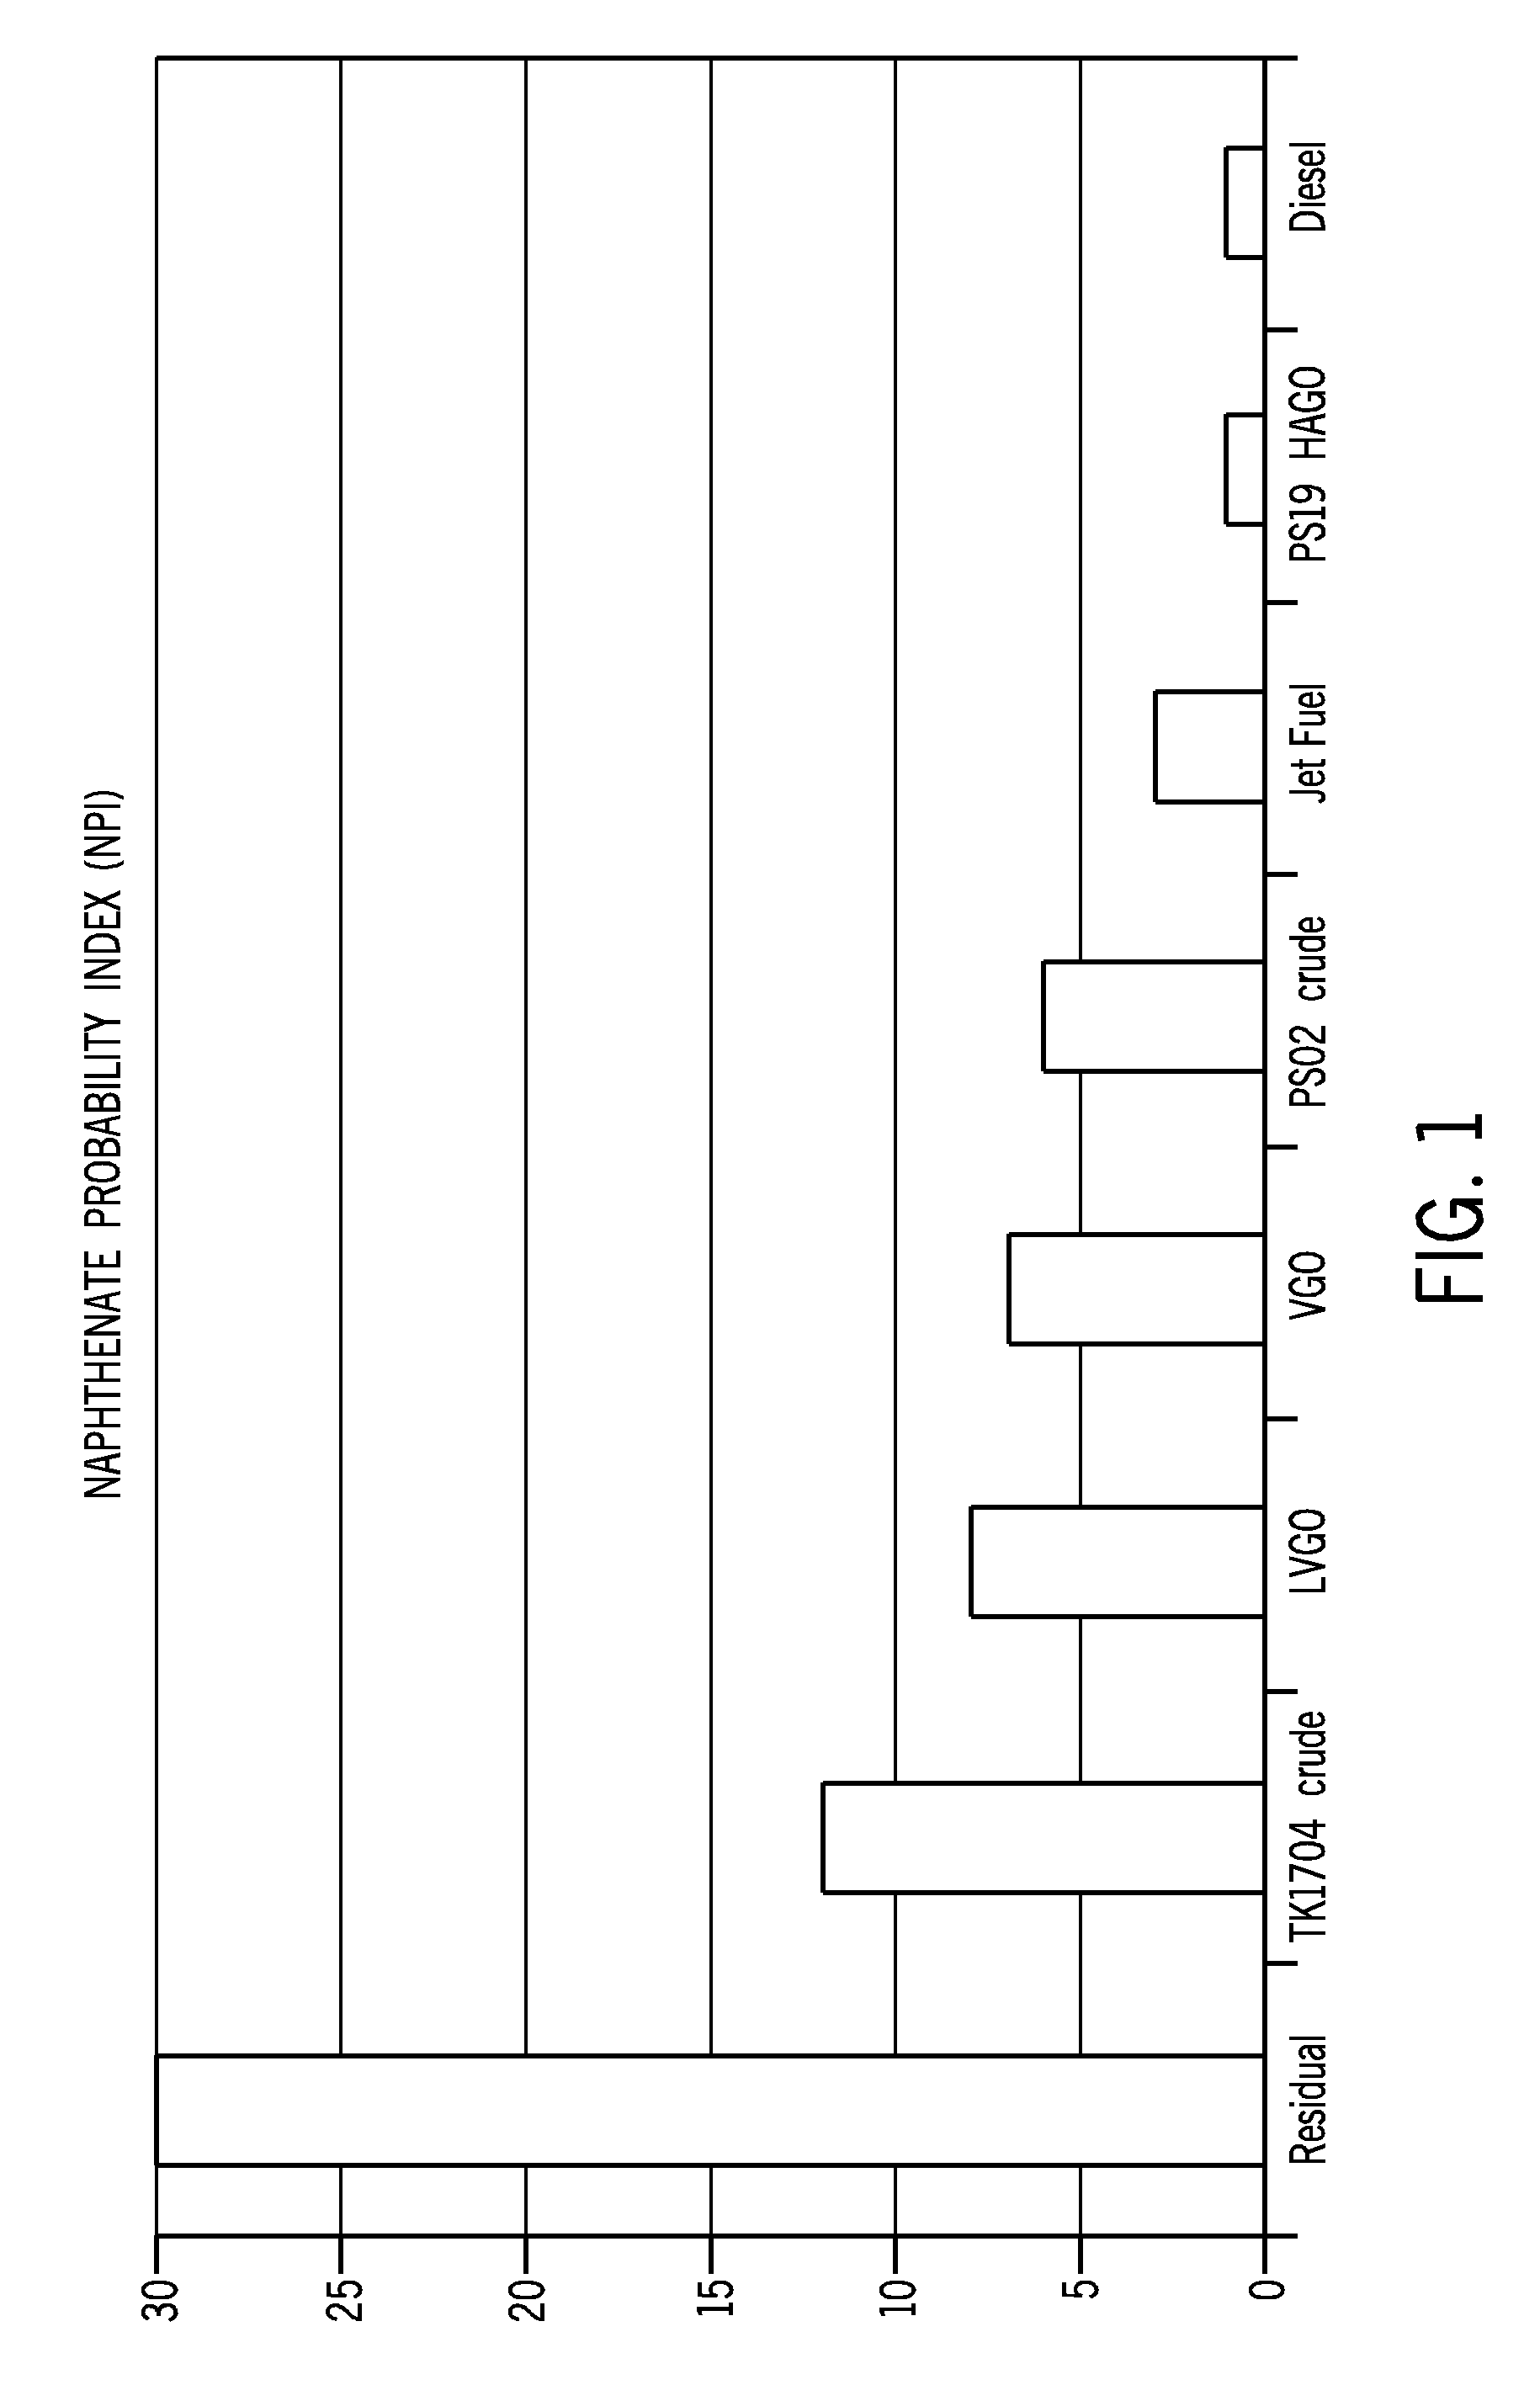 Method of Screening Crude Oil for Low Molecular Weight Naphthenic Acids